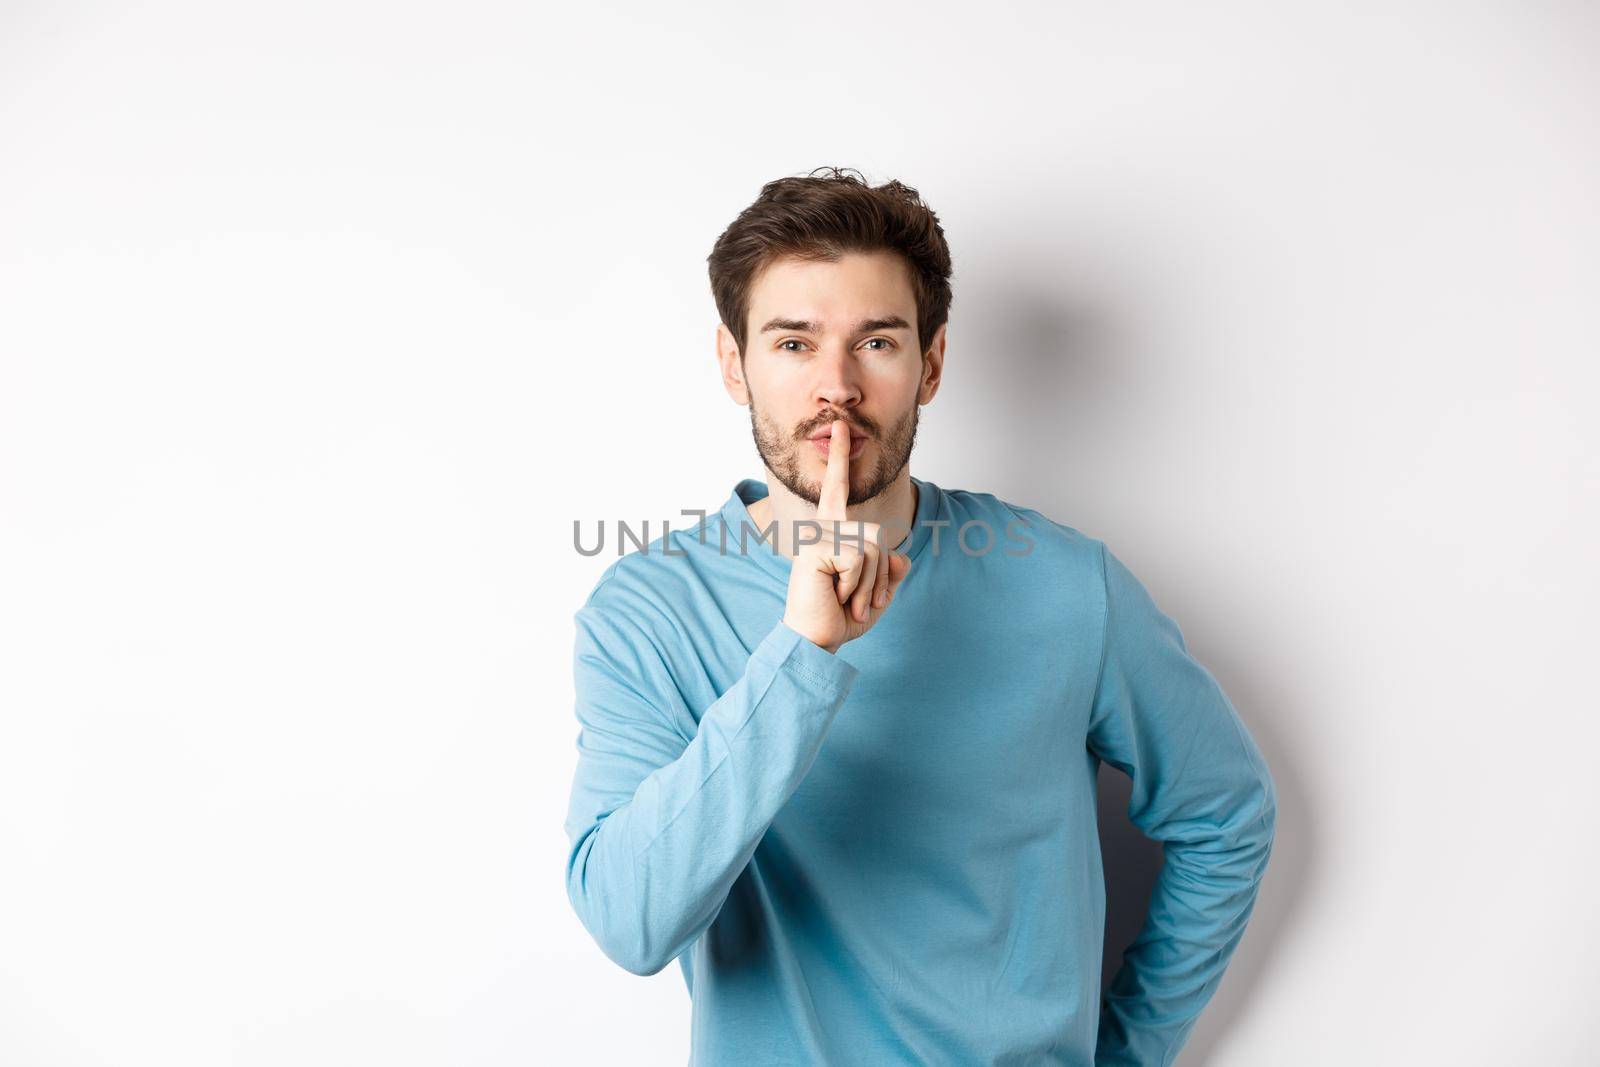 Attractive bearded man asking to keep quiet, showing taboo hush gesture and looking at camera calm, standing over white background.